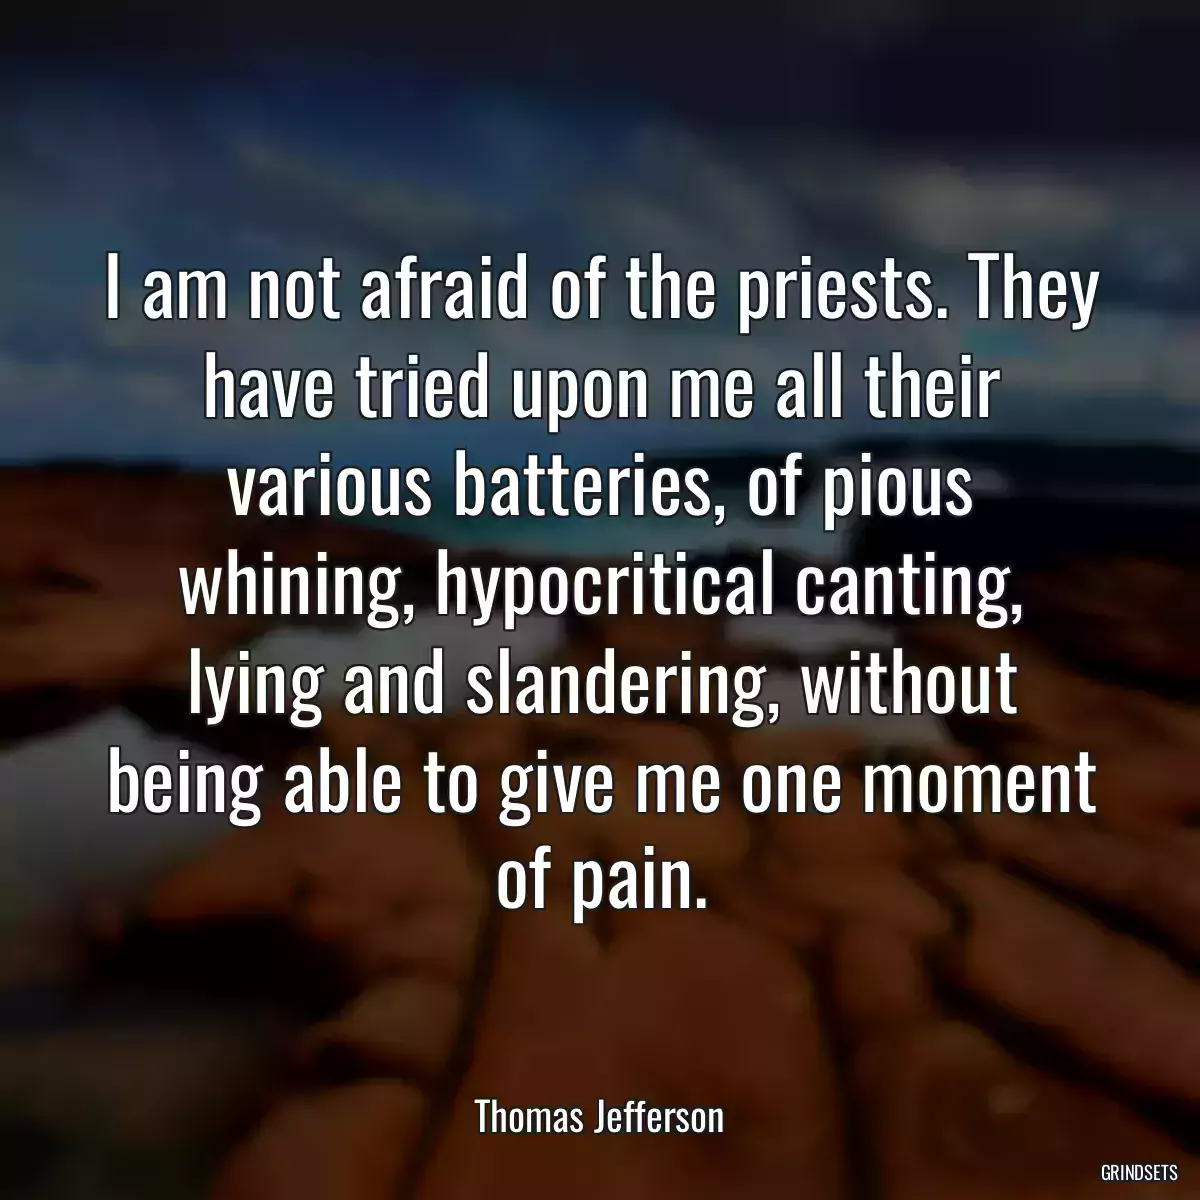 I am not afraid of the priests. They have tried upon me all their various batteries, of pious whining, hypocritical canting, lying and slandering, without being able to give me one moment of pain.